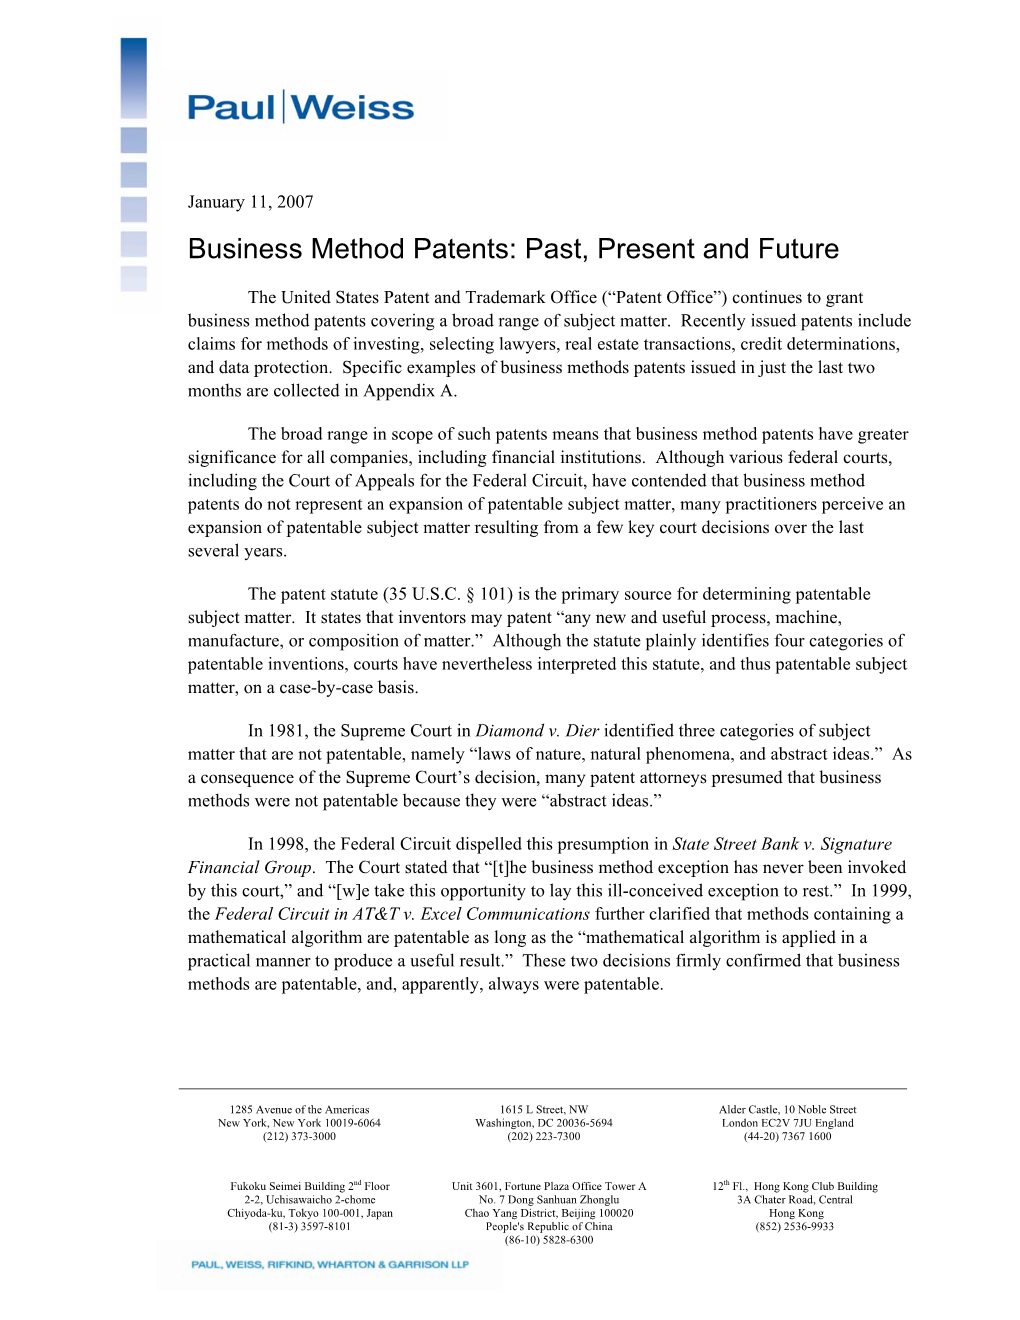 Business Method Patents: Past, Present and Future